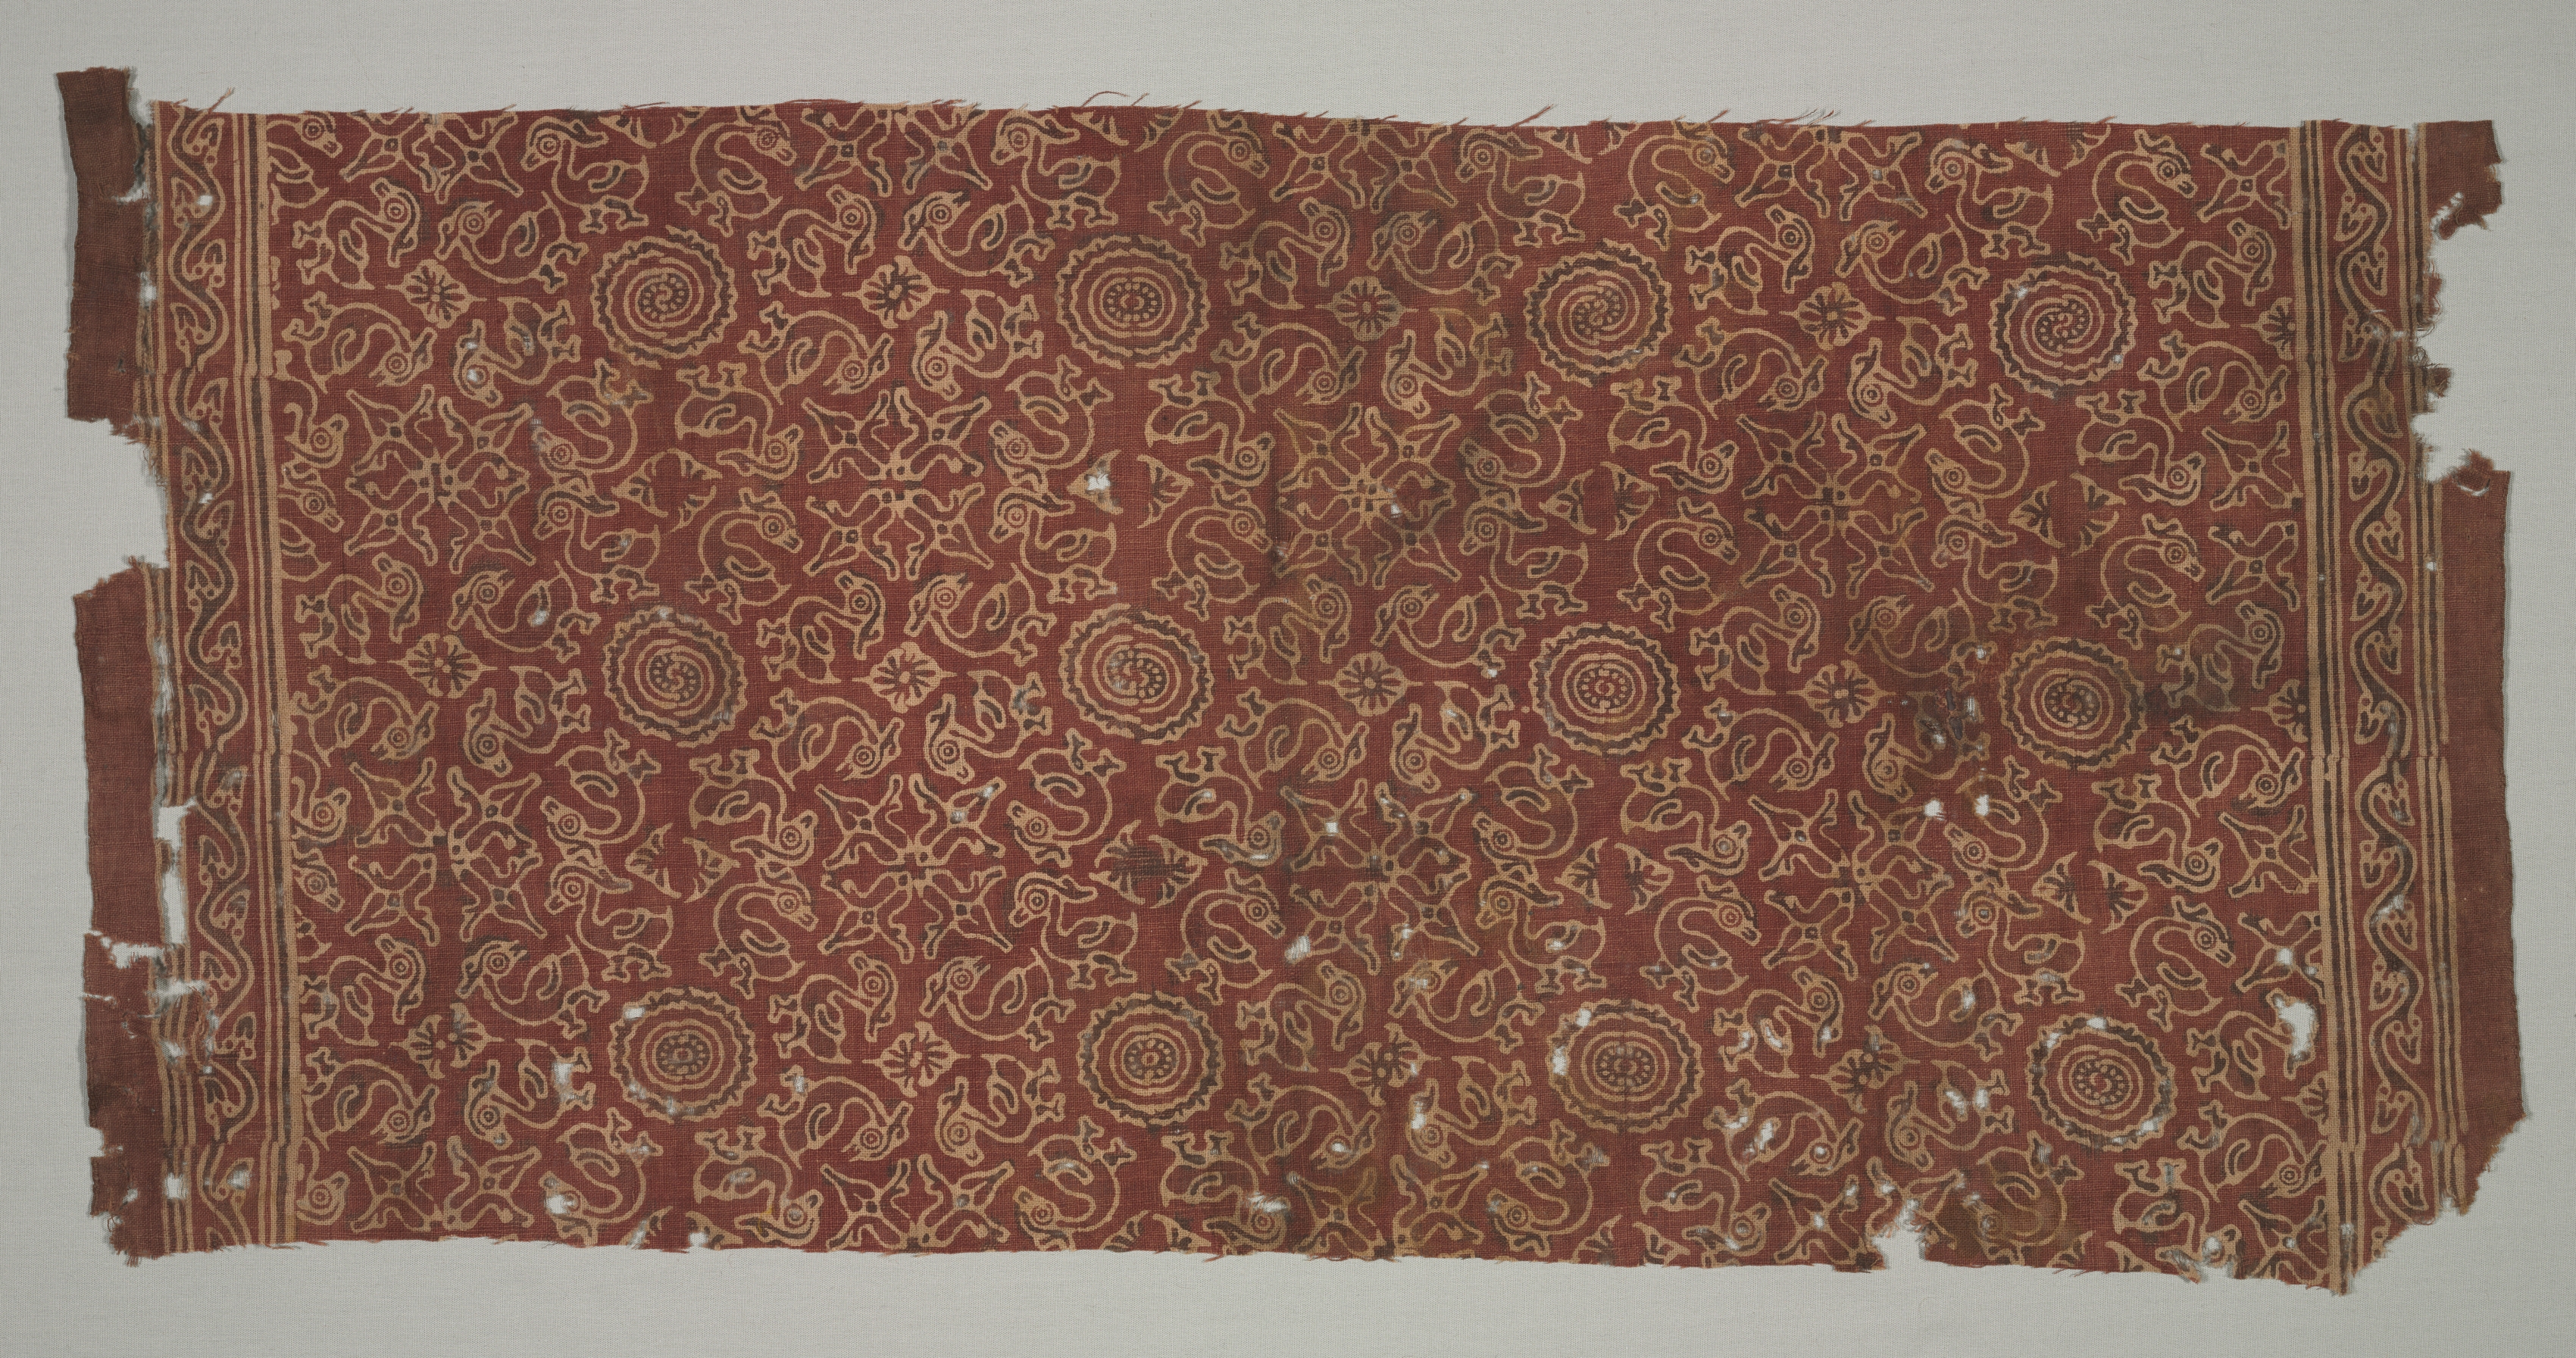 Fragment with geese circling lotus medallions